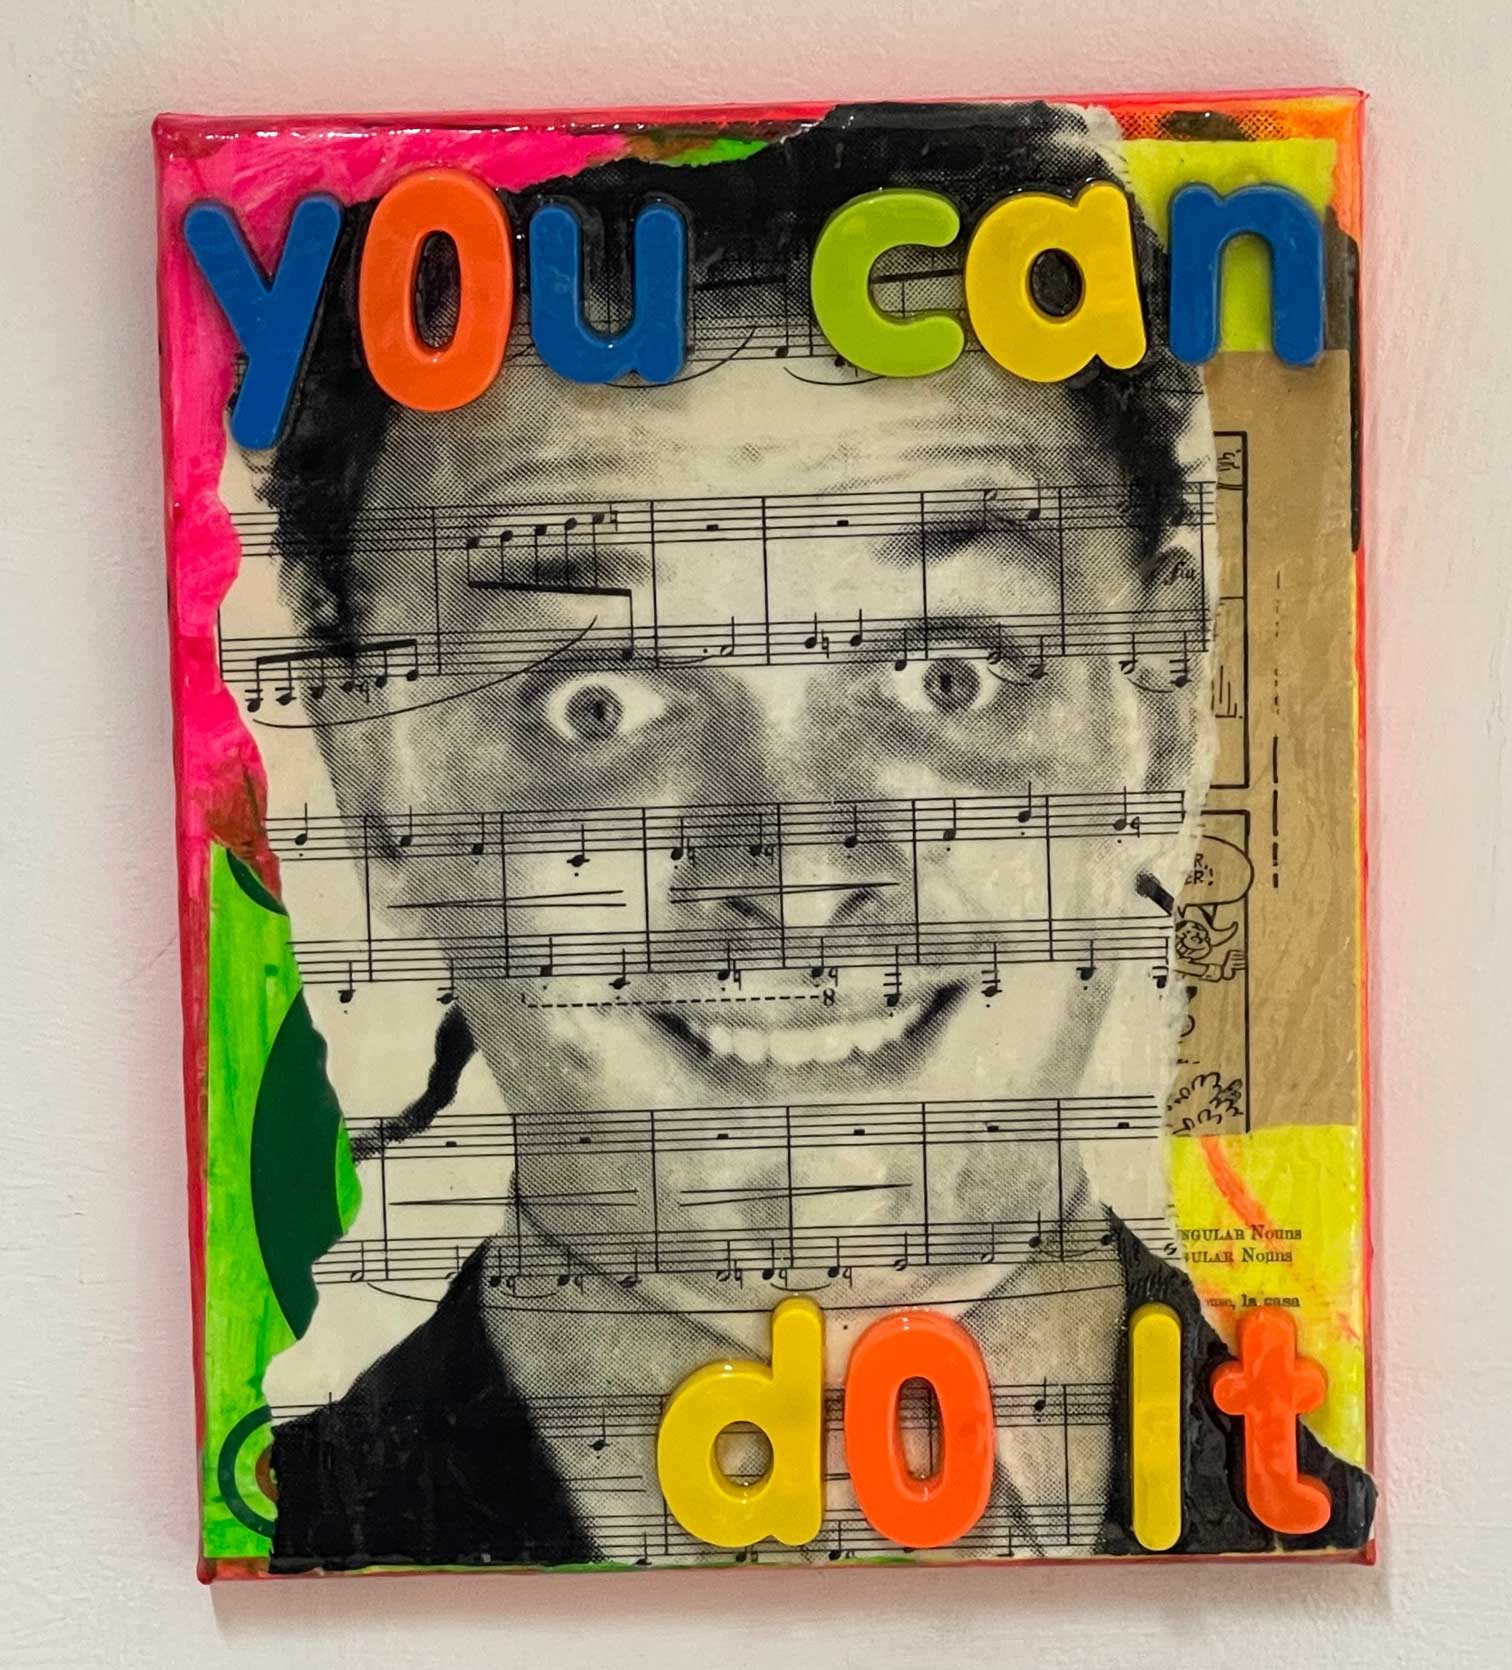 You Can do it Rick Painting, Mixed media on Canvas, 25cm x 30cm, Unframed. Buy online with free delivery worldwide to your door.